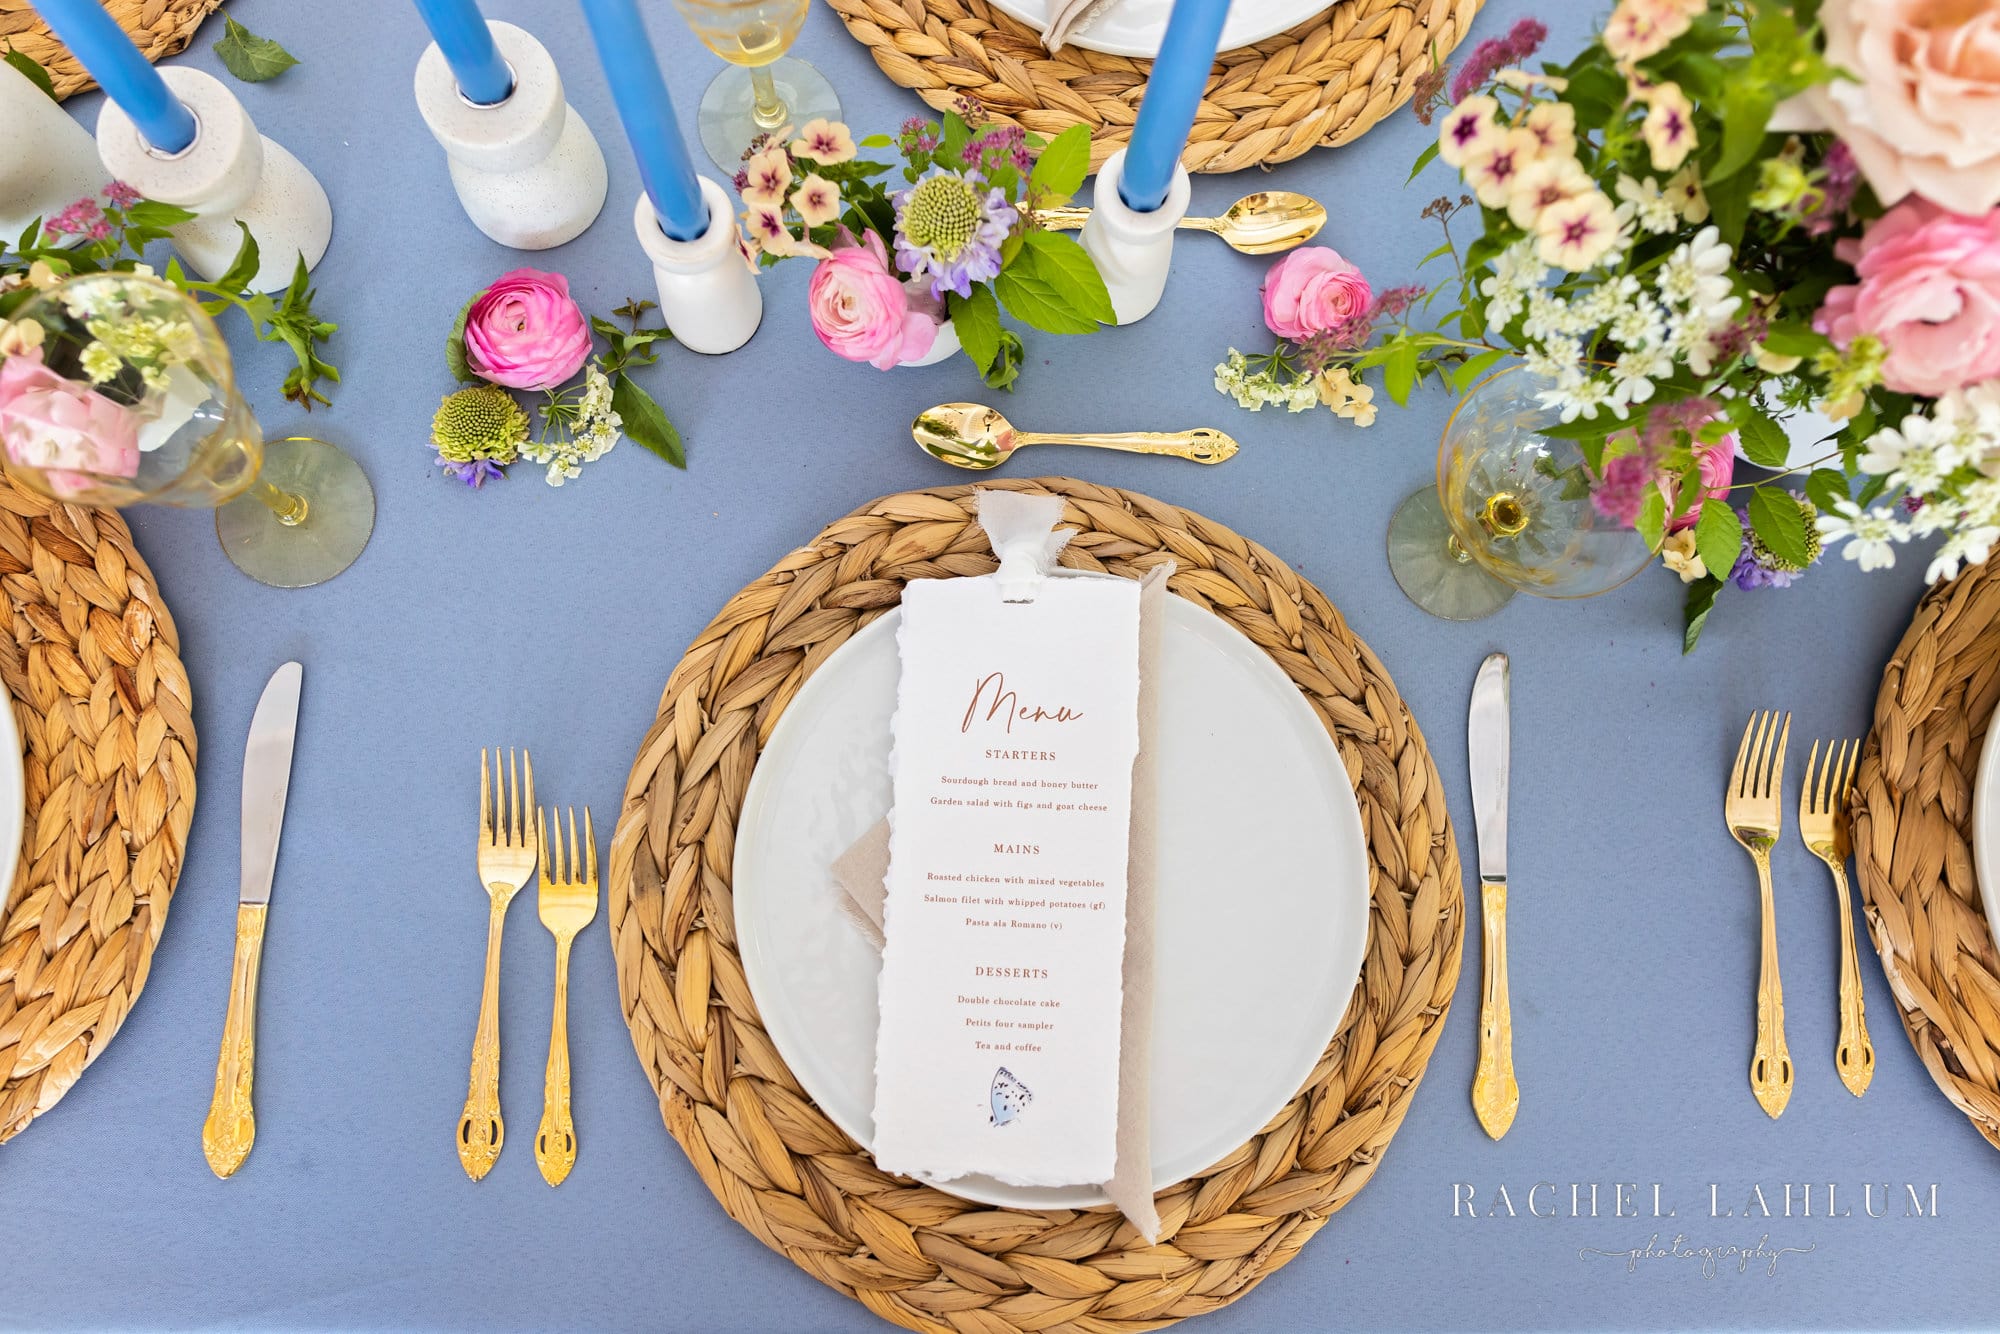 Wedding menu made for stylized wedding photo shoot on top of place setting.